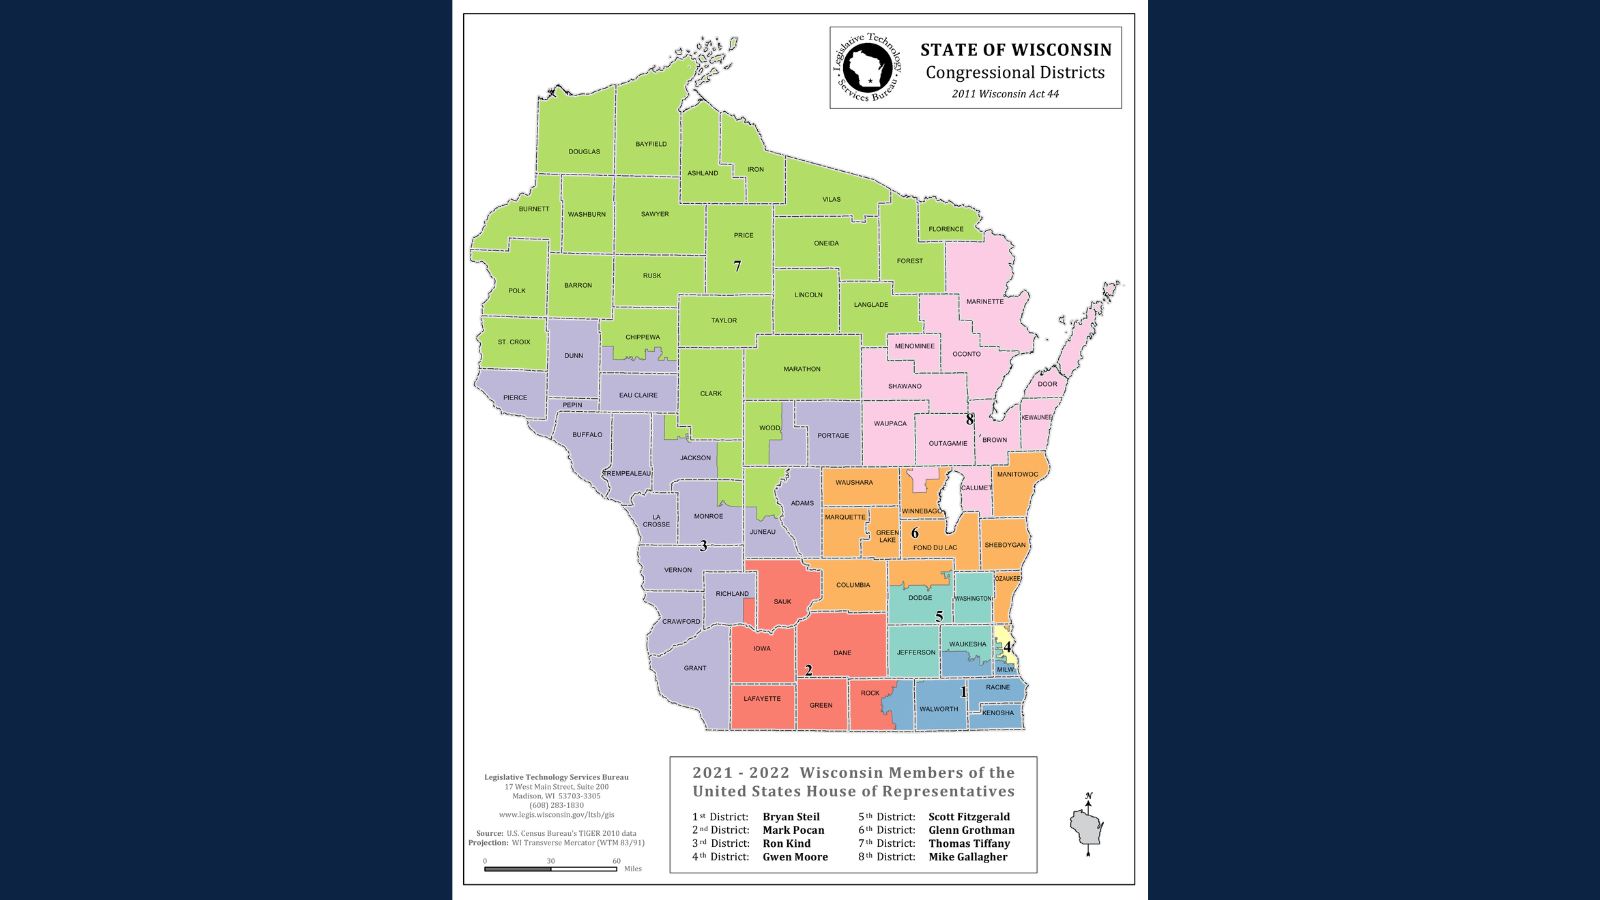 Wisconsin may get fairer state legislative maps. But the congressional districts will likely remain GOP-friendly.